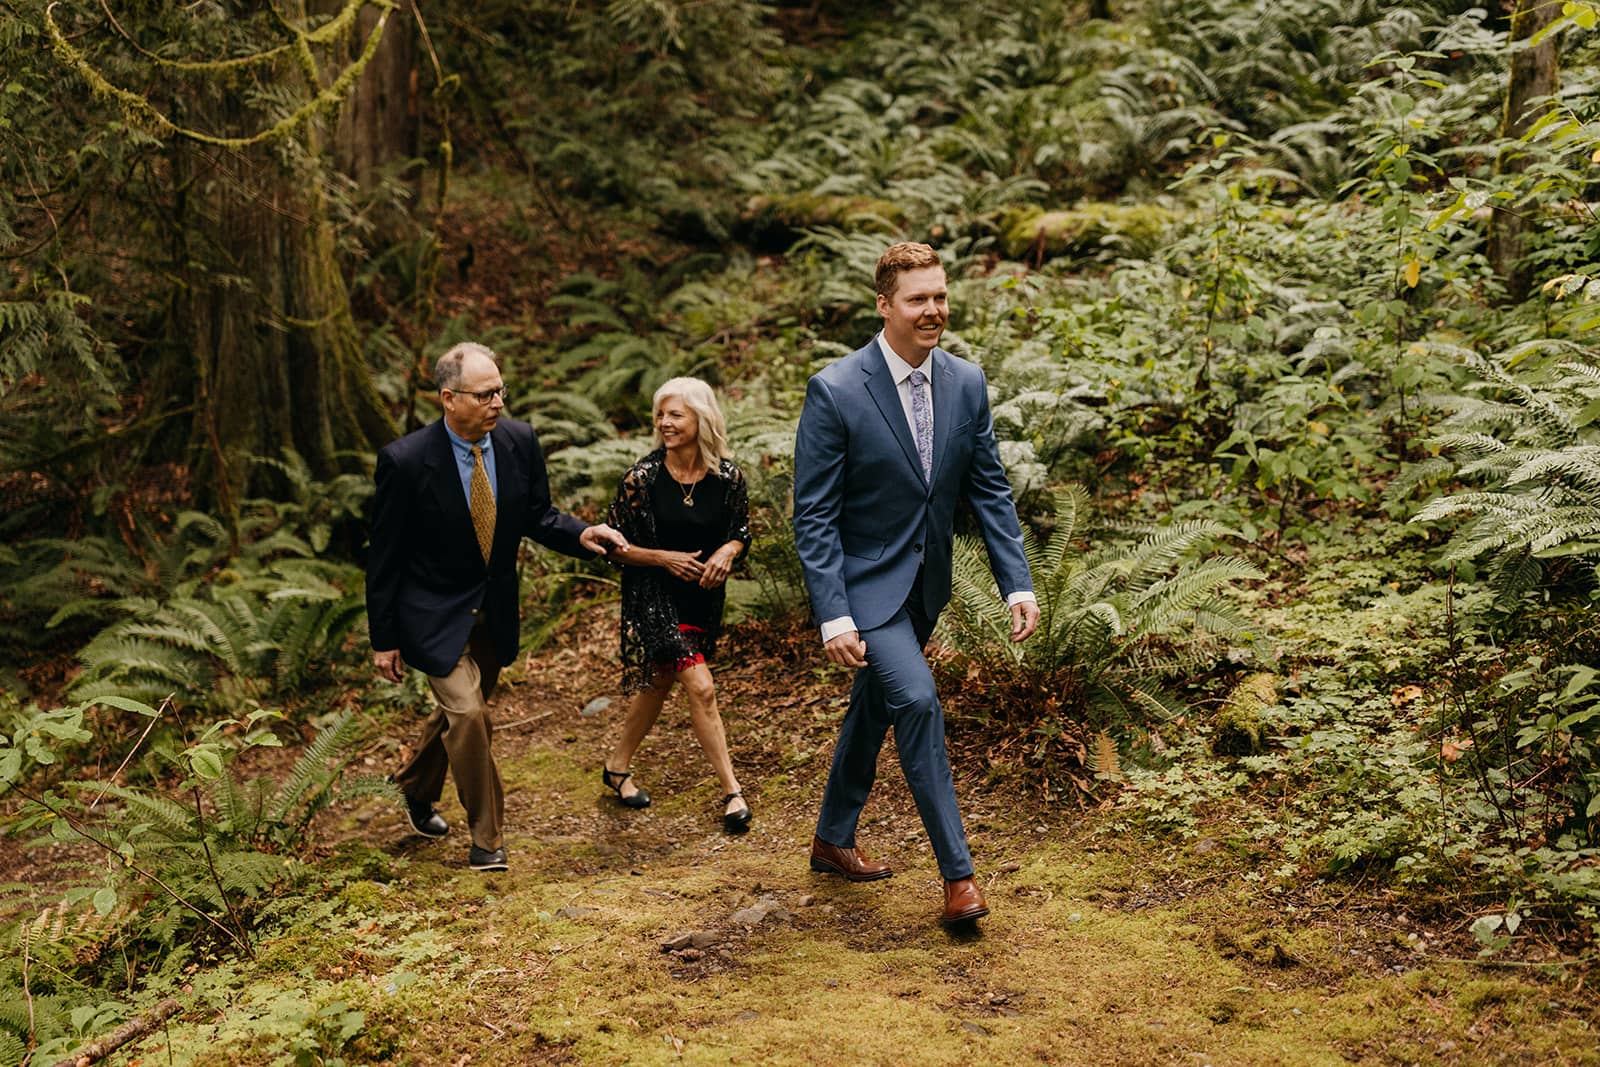 The groom hikes down the aisle with his parents.